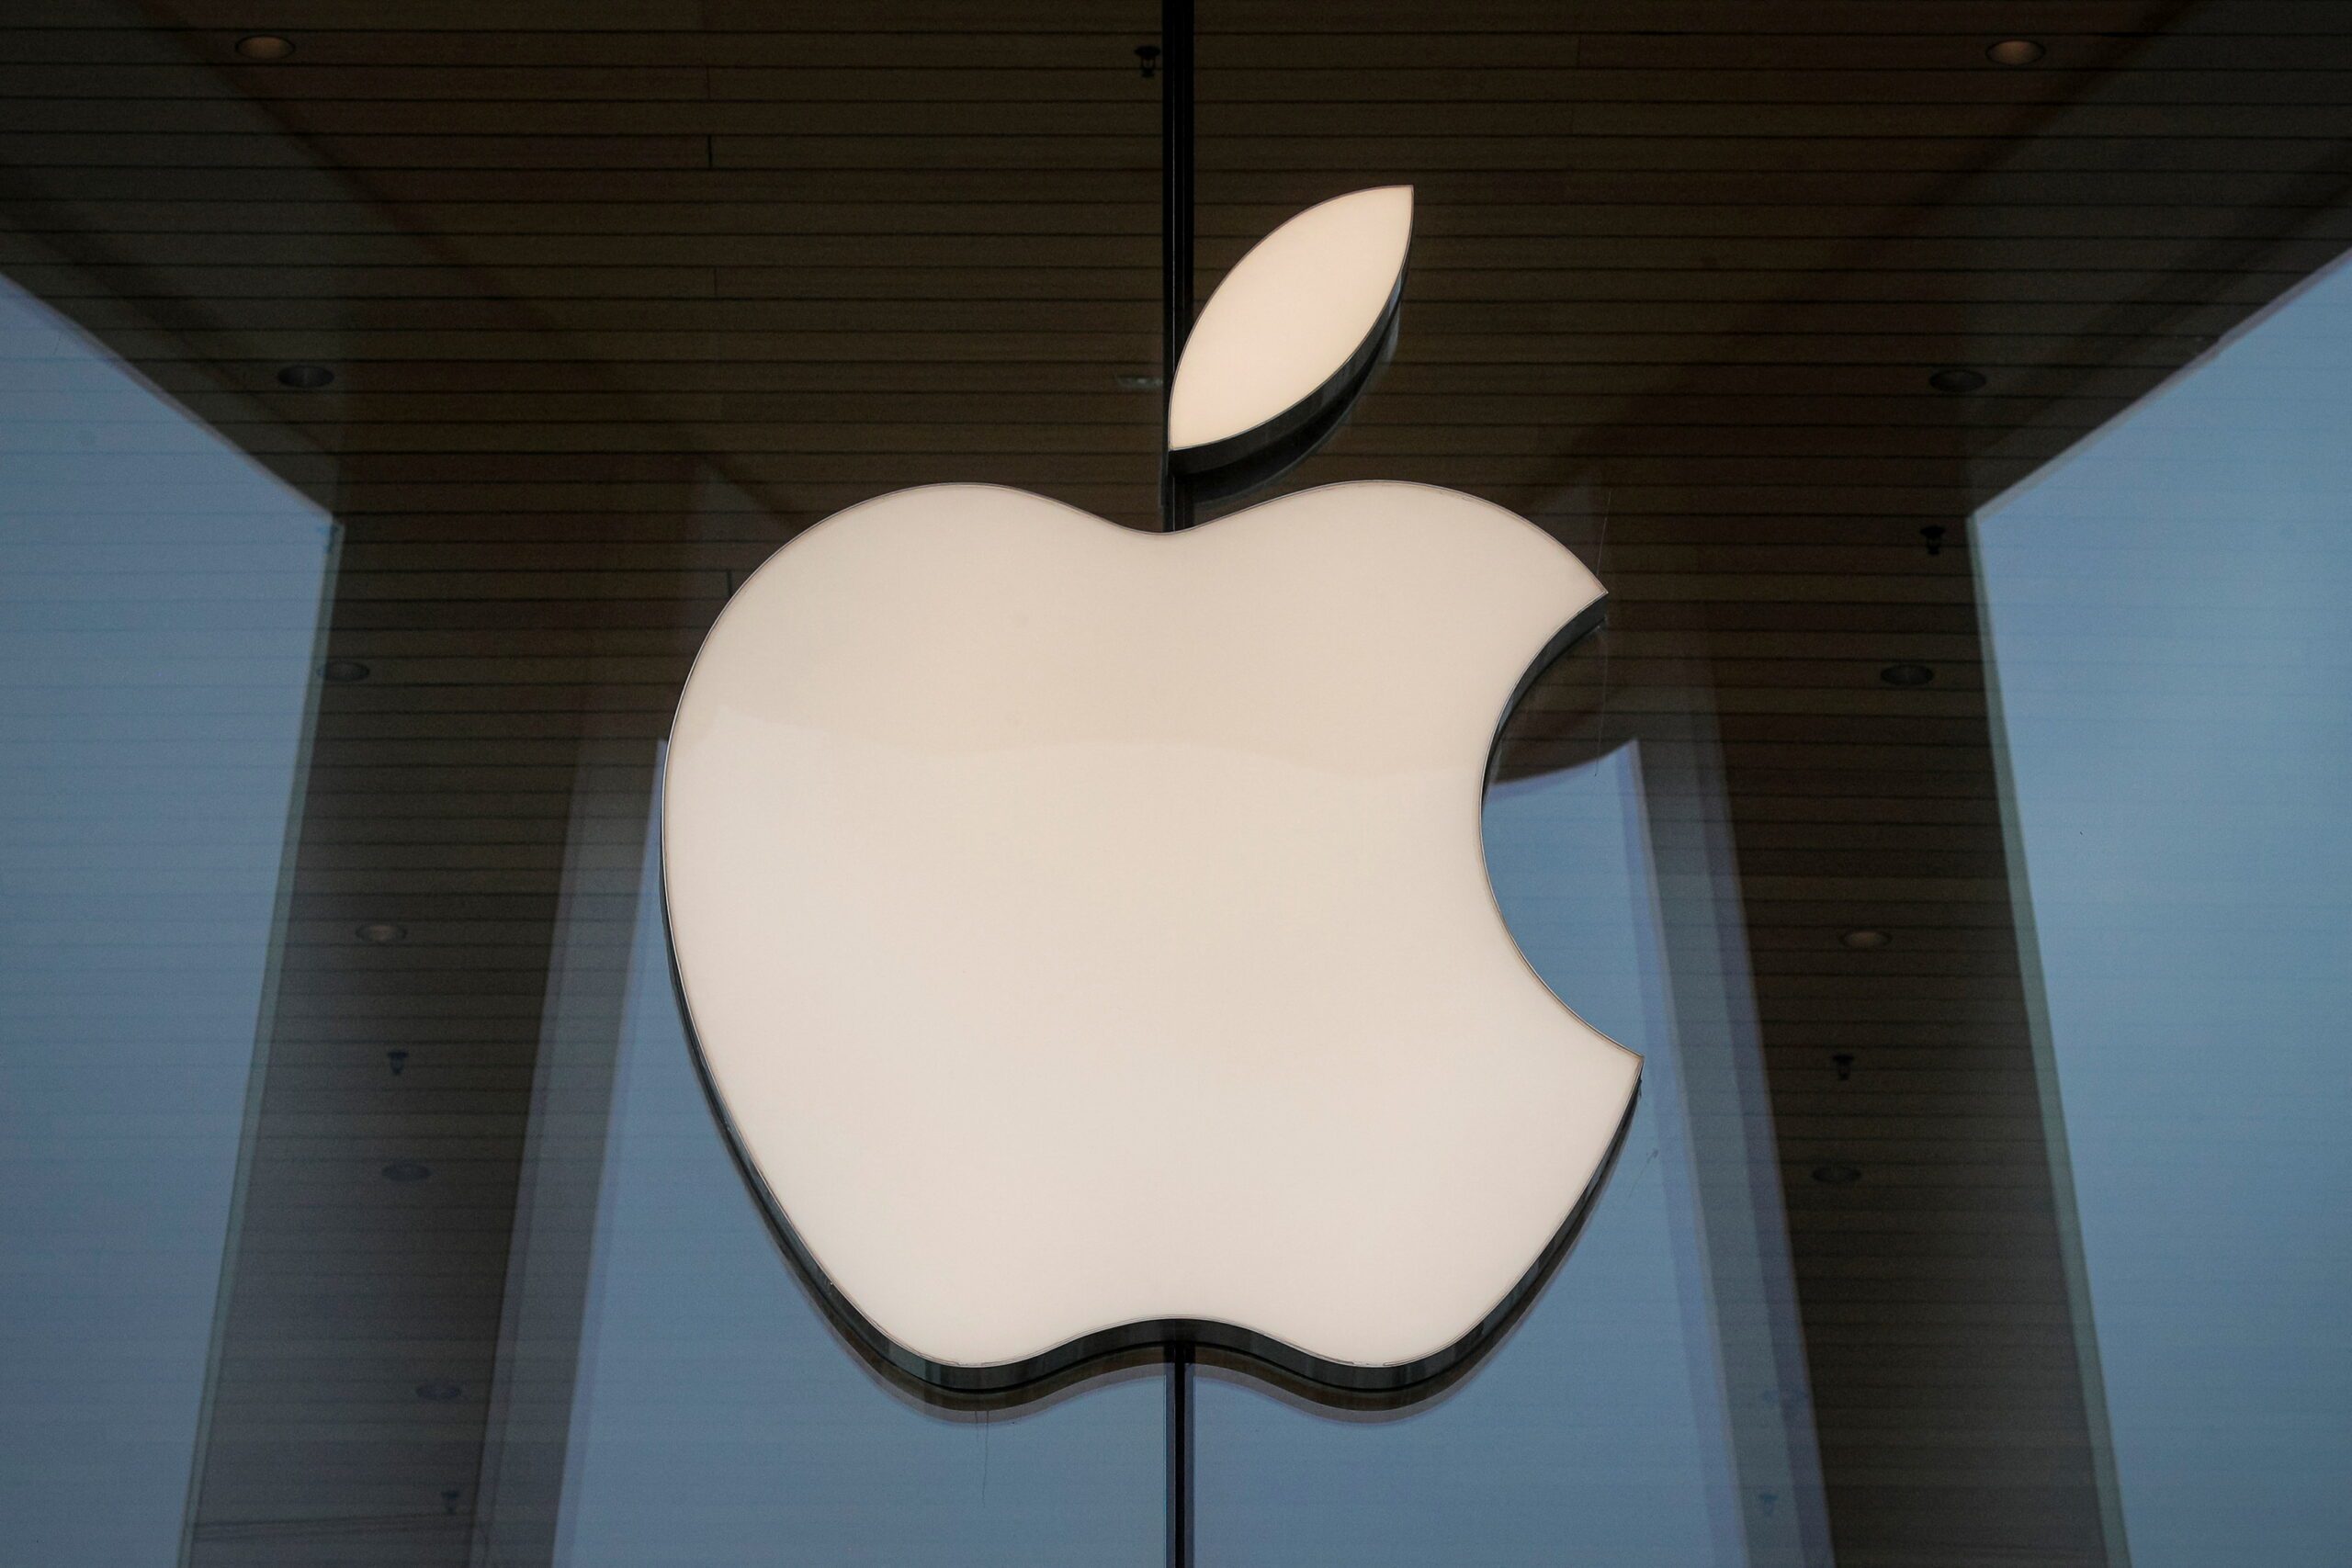 Former Apple car engineer pleads guilty to trade secret theft